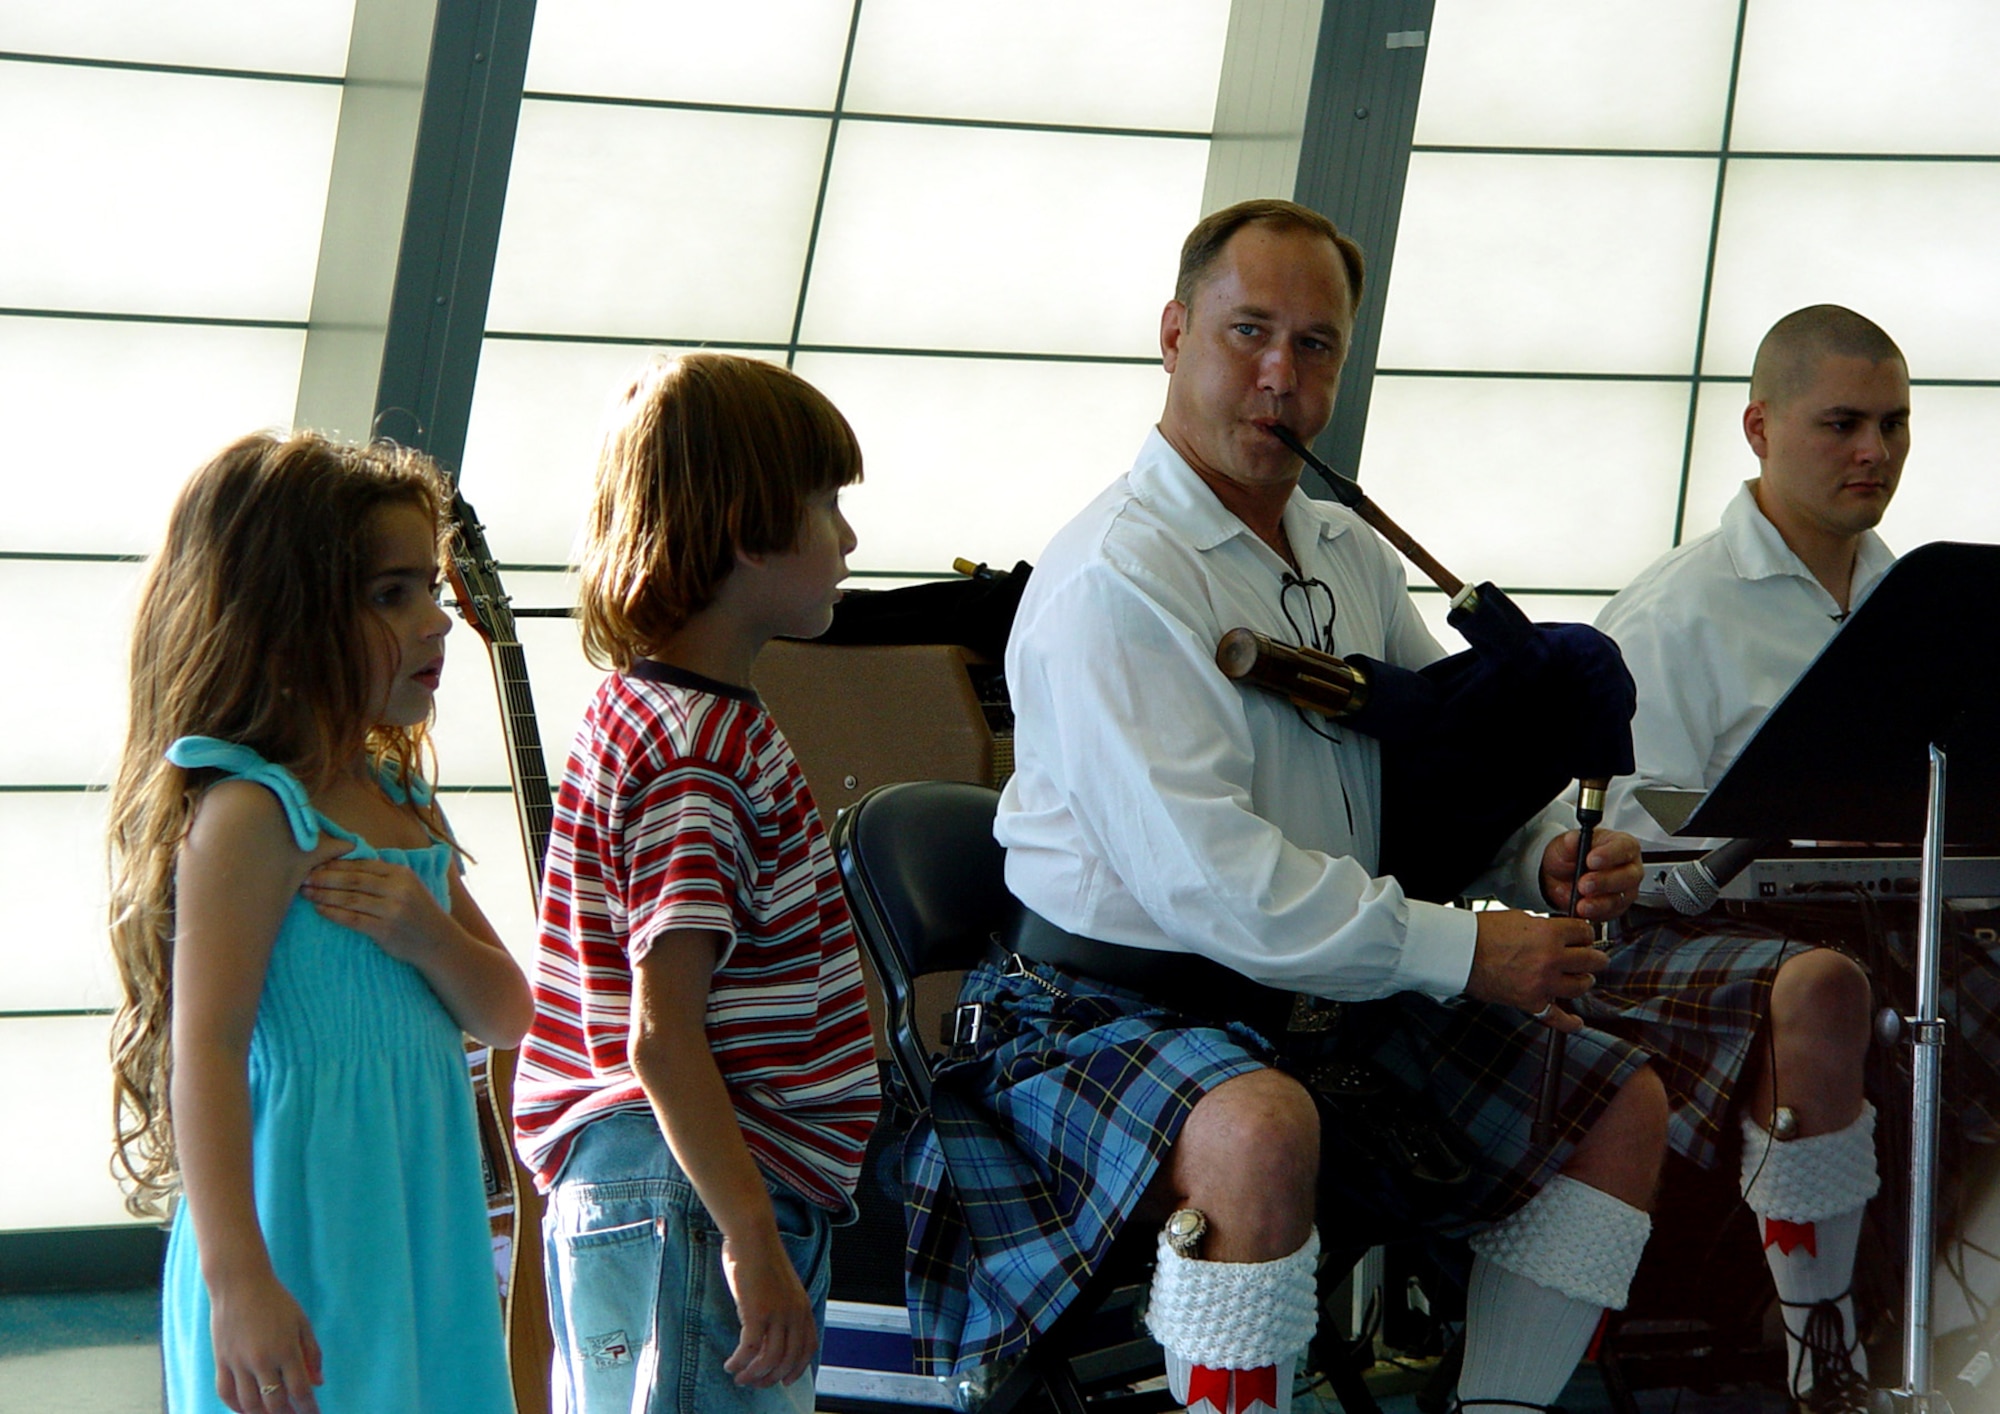 Master Sgt. Scott Gunn and Senior Airman Tim Shaw, members of the Band of the Air Force Reserve's Celtic ensemble, Southern Aire, perform at the Miami Children's Museum on May 19, 2006, as two children look on.  The Band of the Air Force Reserve, from Robins Air Force Base, Ga., performed nine times in South Florida as part of a community outreach project. (U.S. Air Force photo/Lisa Macias)